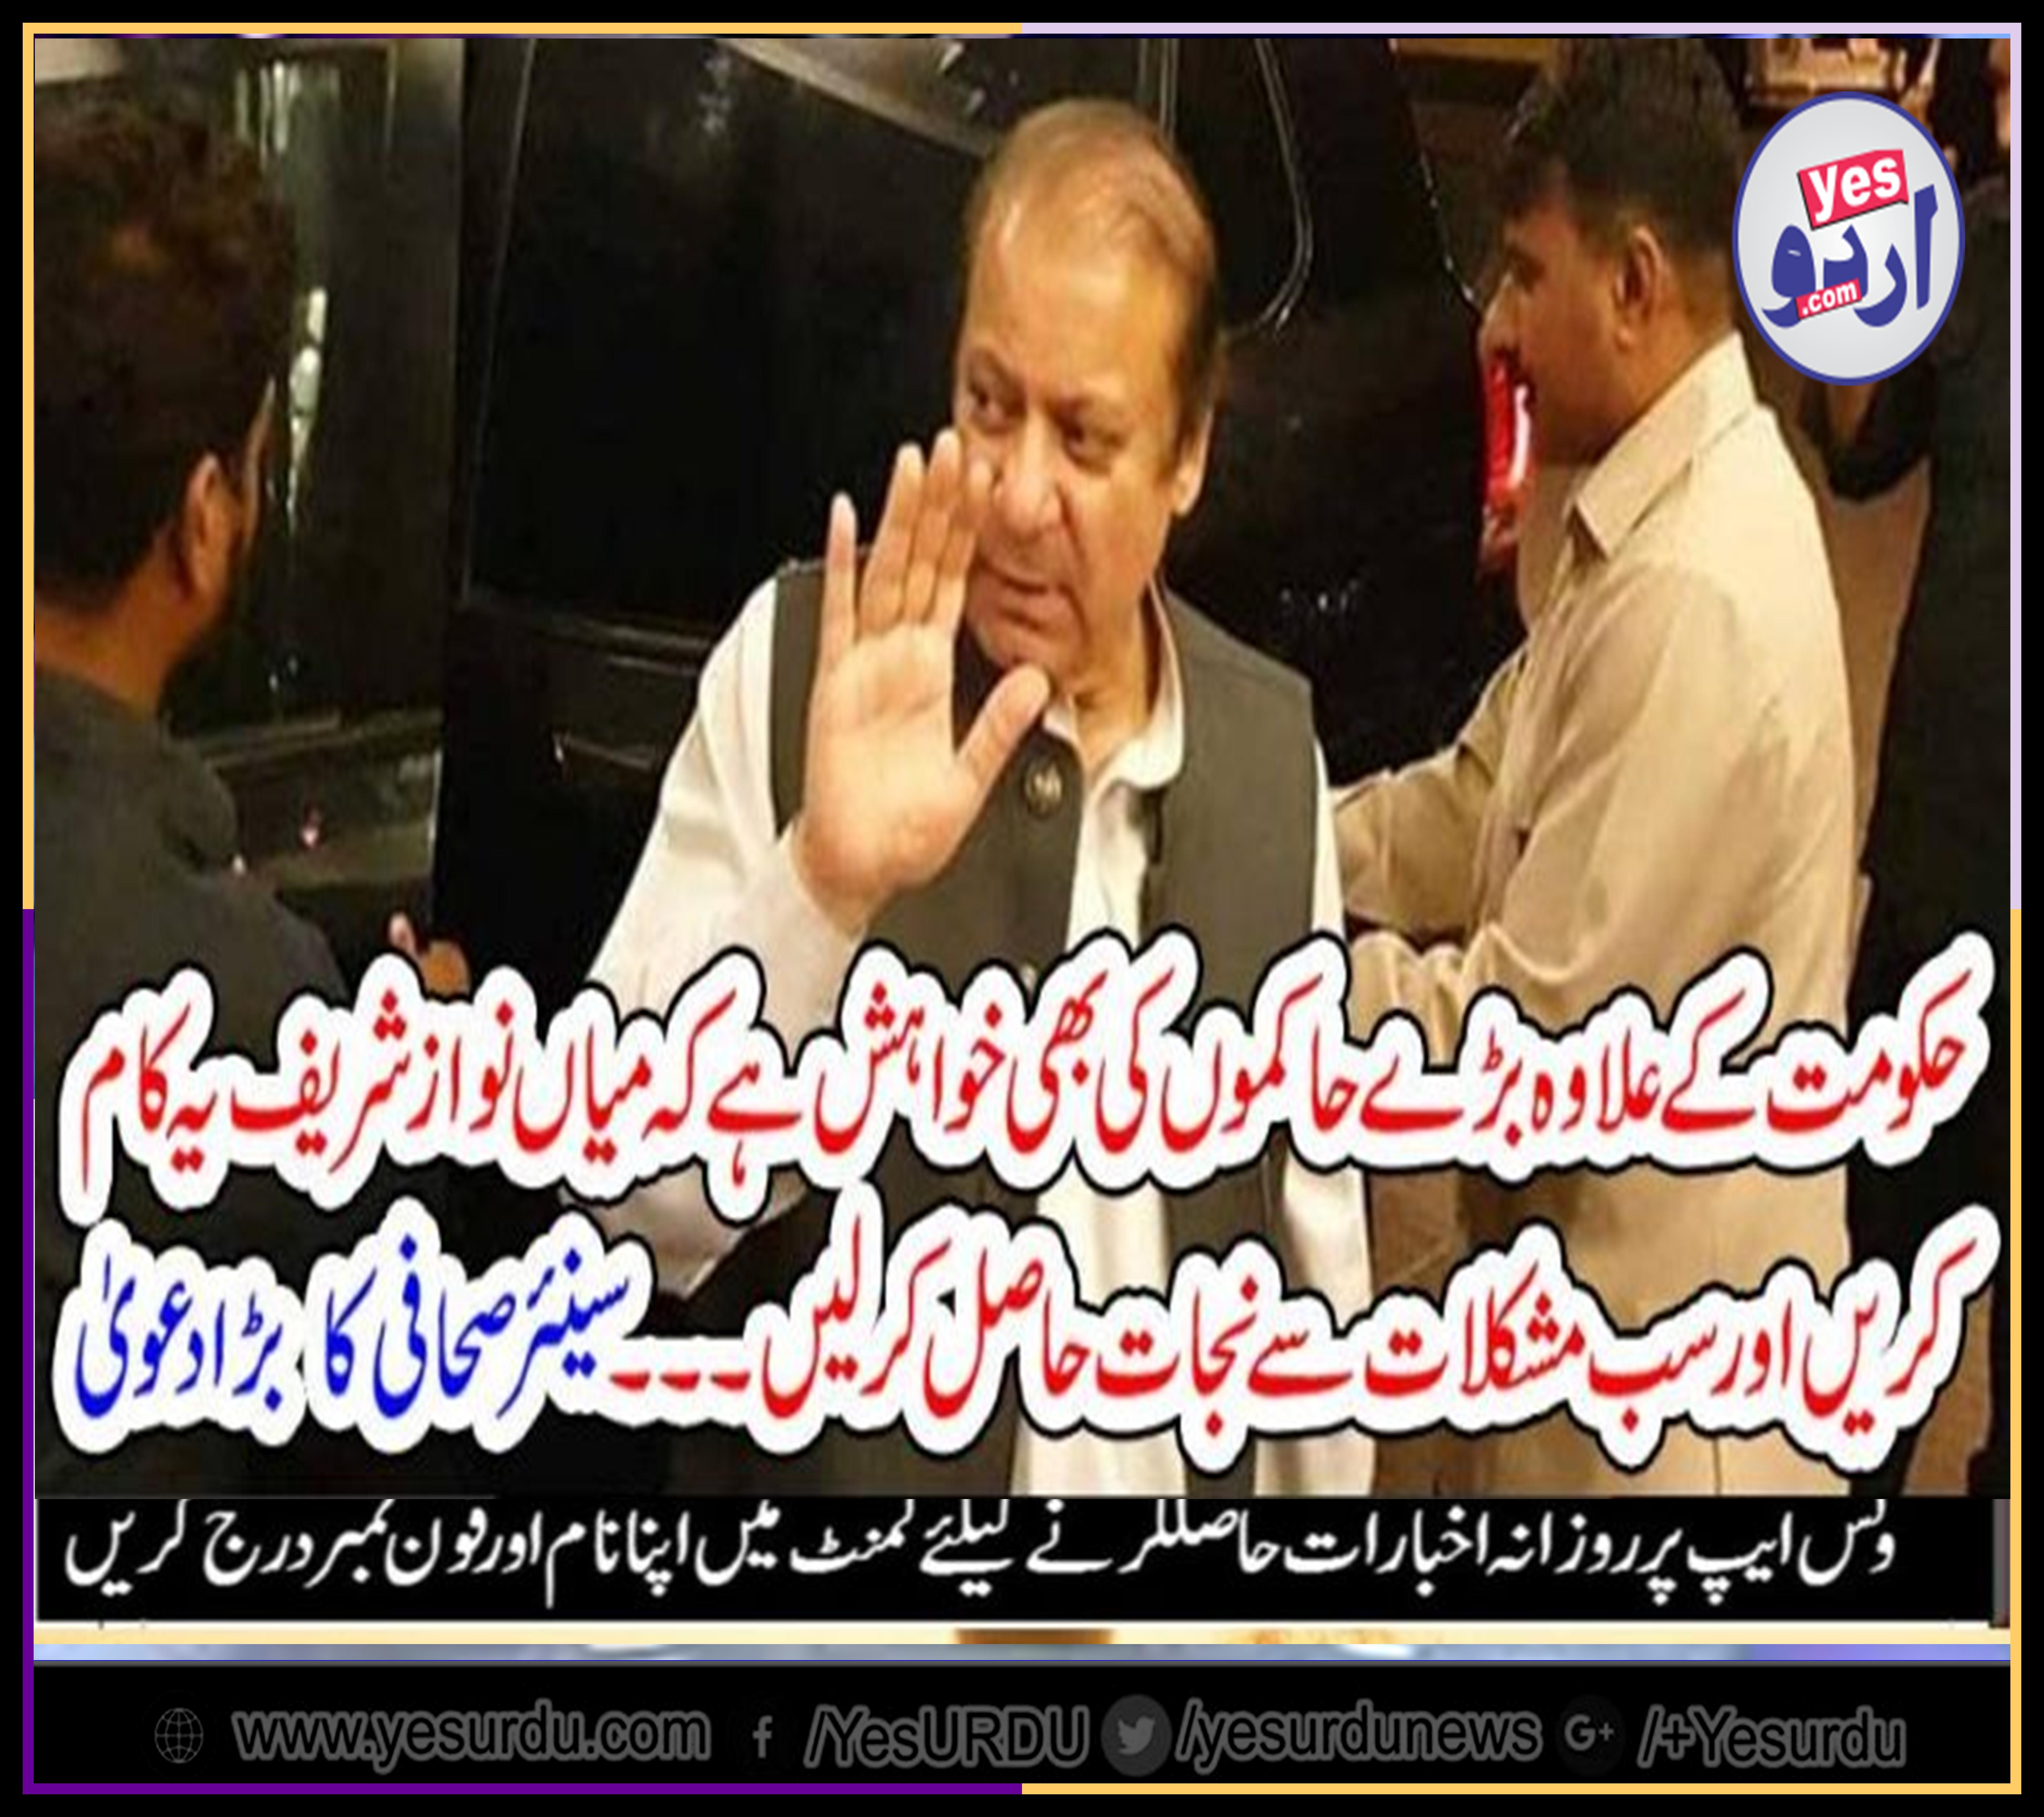 MIAN NAWAZ SHAREIF, SHOULD, DO, THIS, DEAL, AND, GET, RID, OF, ALL, MISERIES, SENIOR, JOURNALIST, CLAIMS